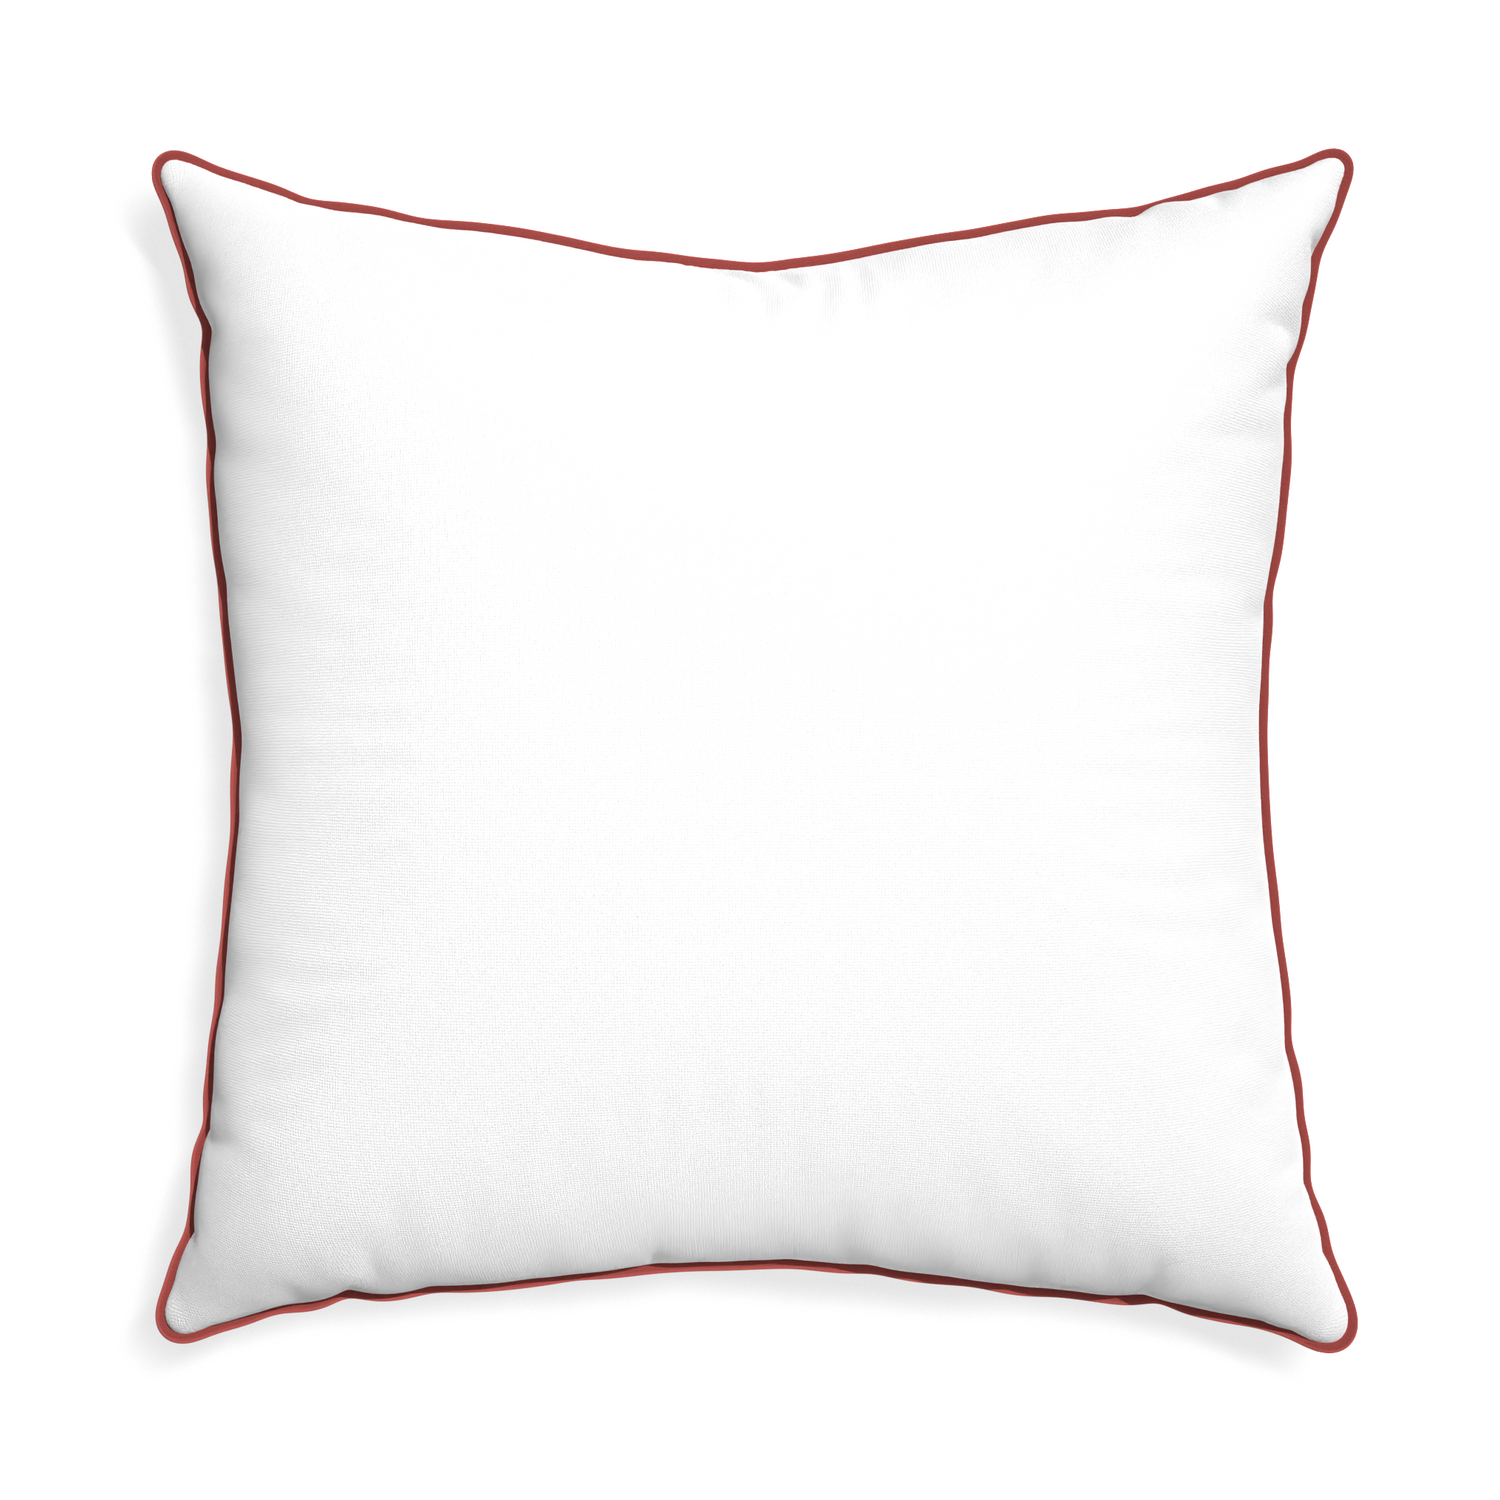 Euro-sham snow custom white cottonpillow with c piping on white background